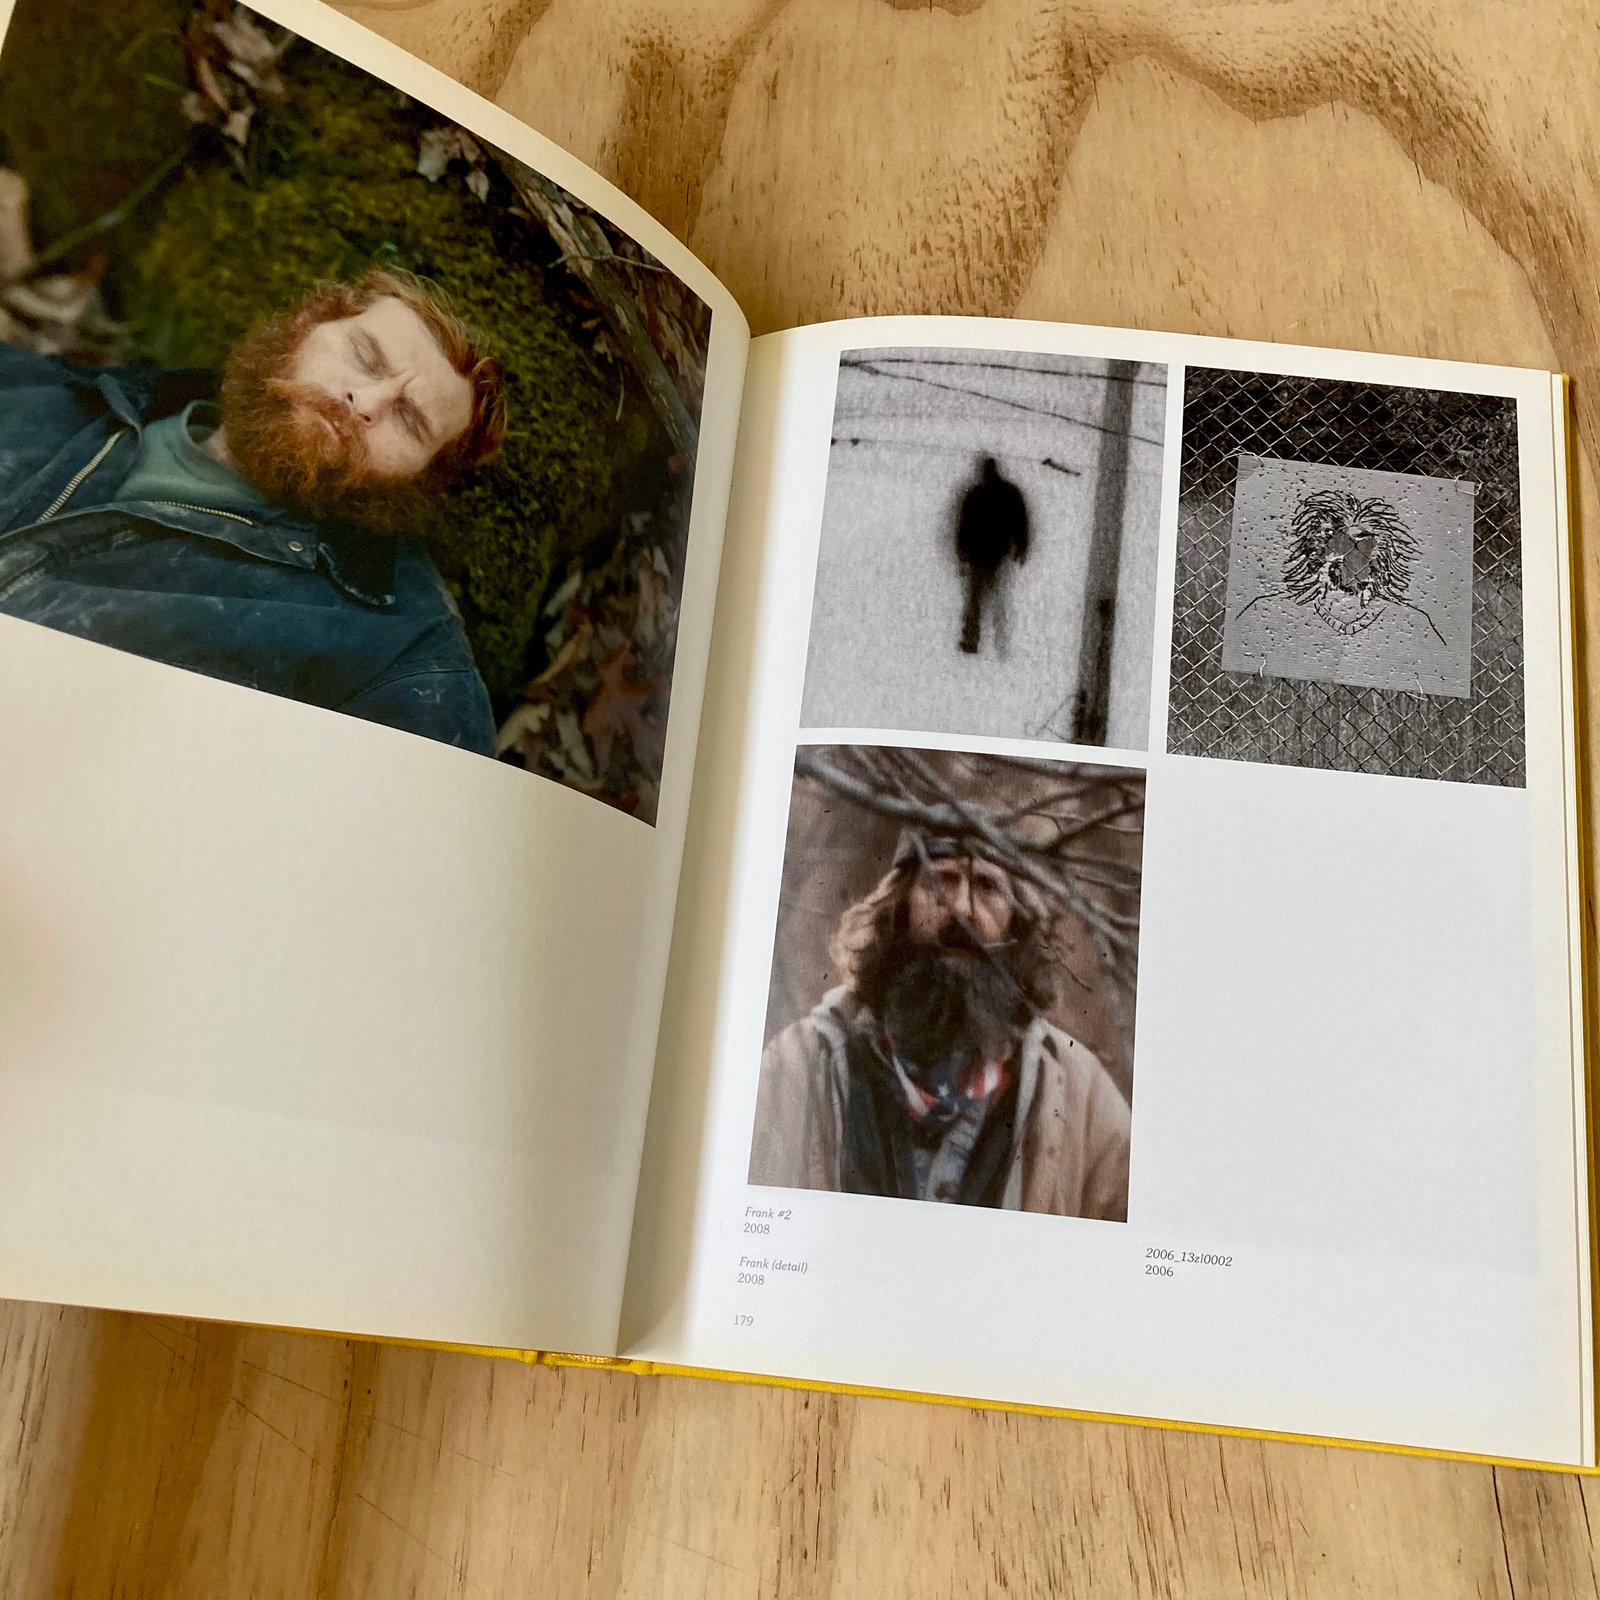 Alec Soth - From Here To There: Alec Soth's America | Photobook Junkies